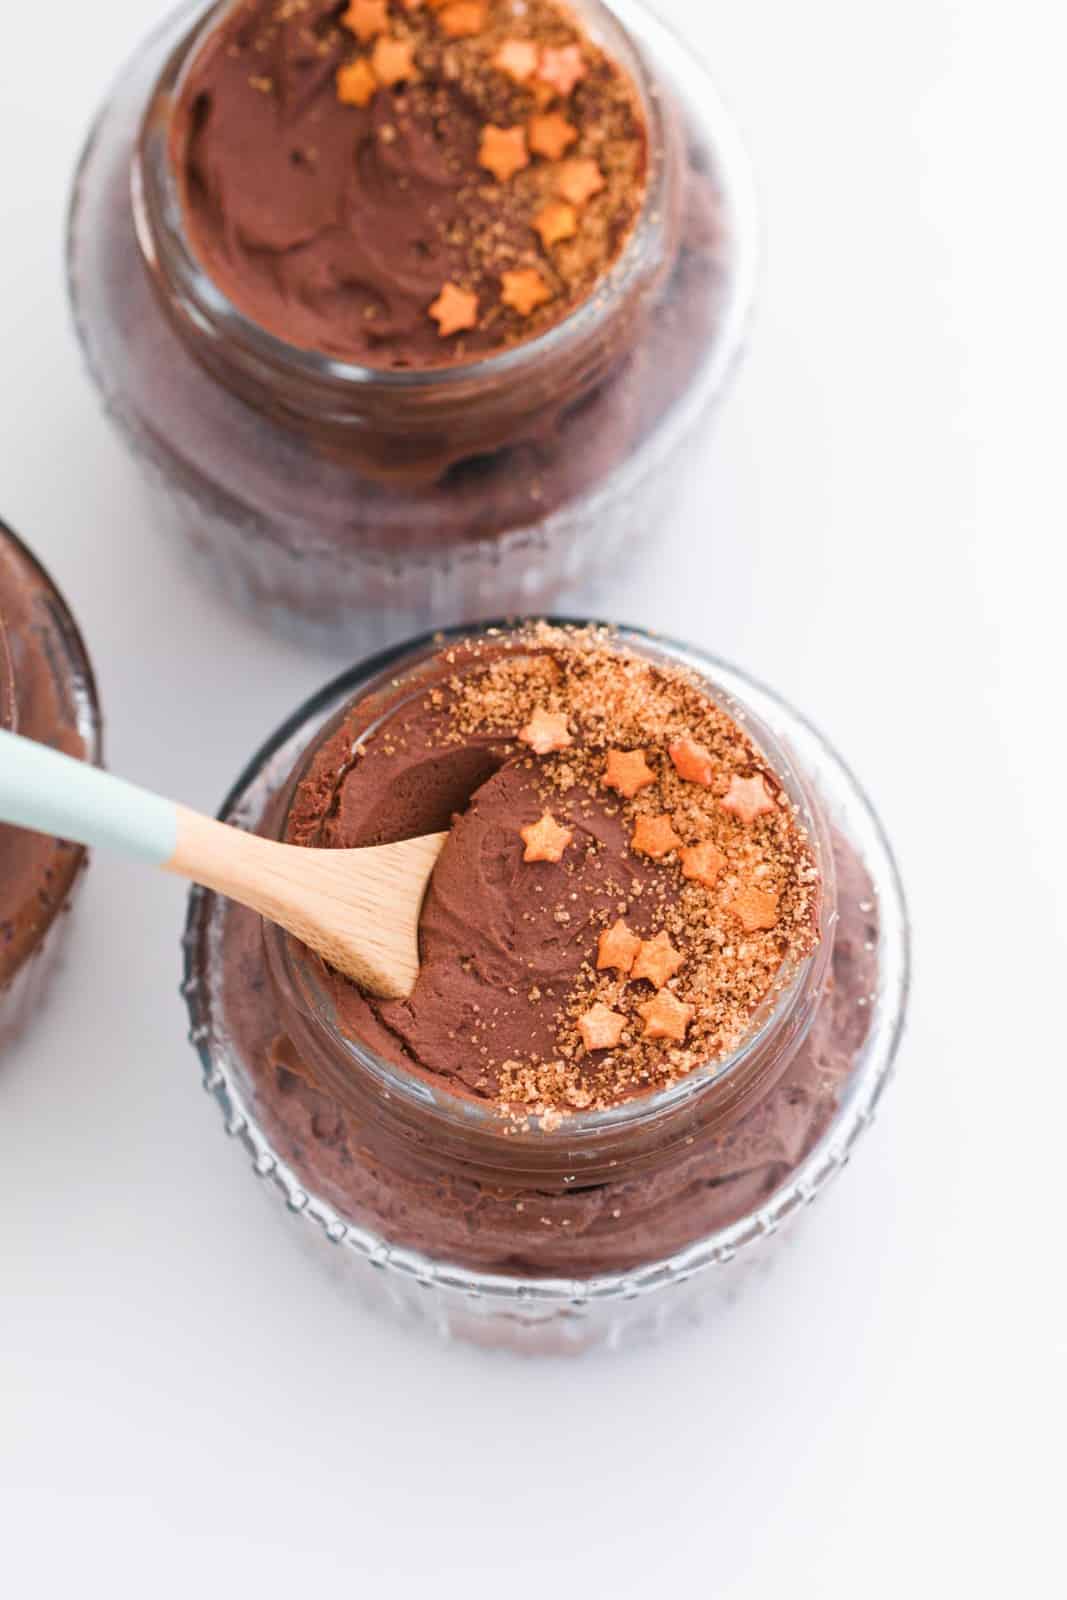 A spoon being dipped into a glass jar of chocolate mousse with gold decorations.